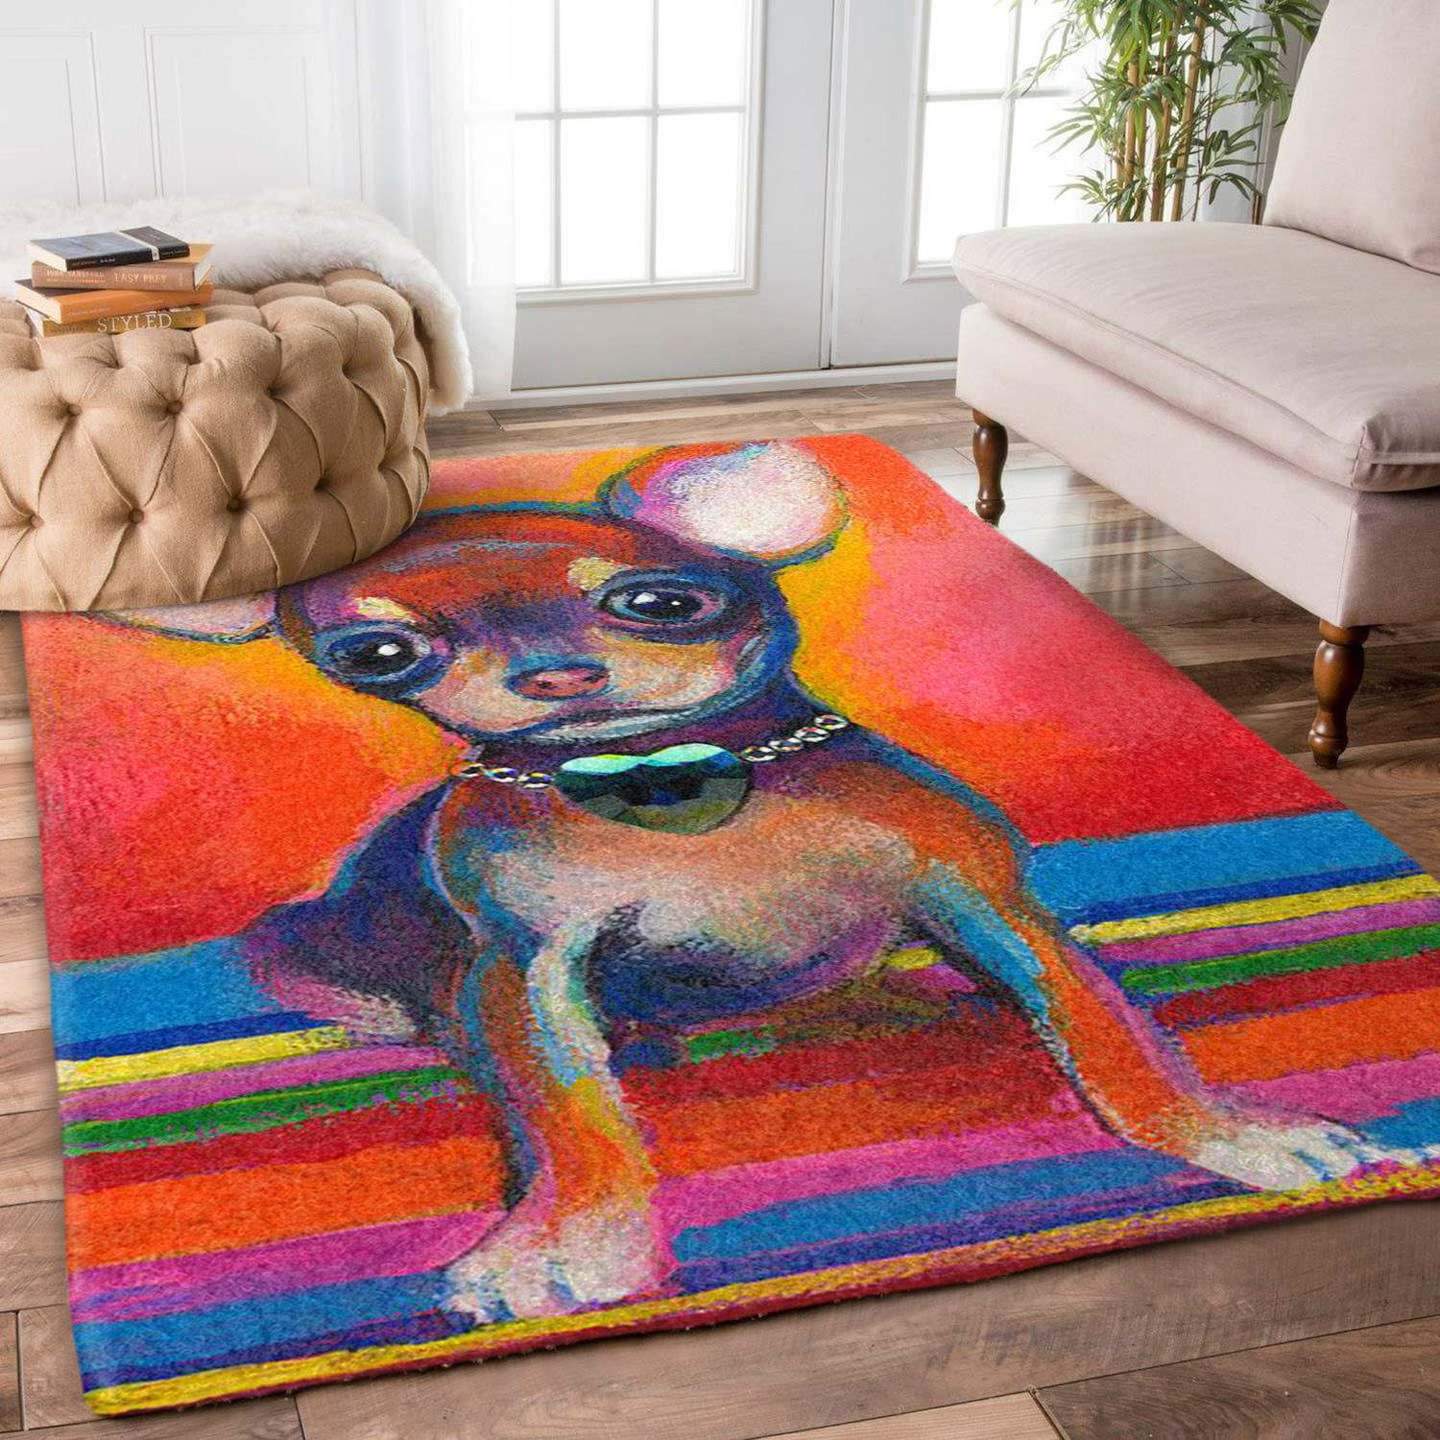 Chihuahua Limited Edition Rug